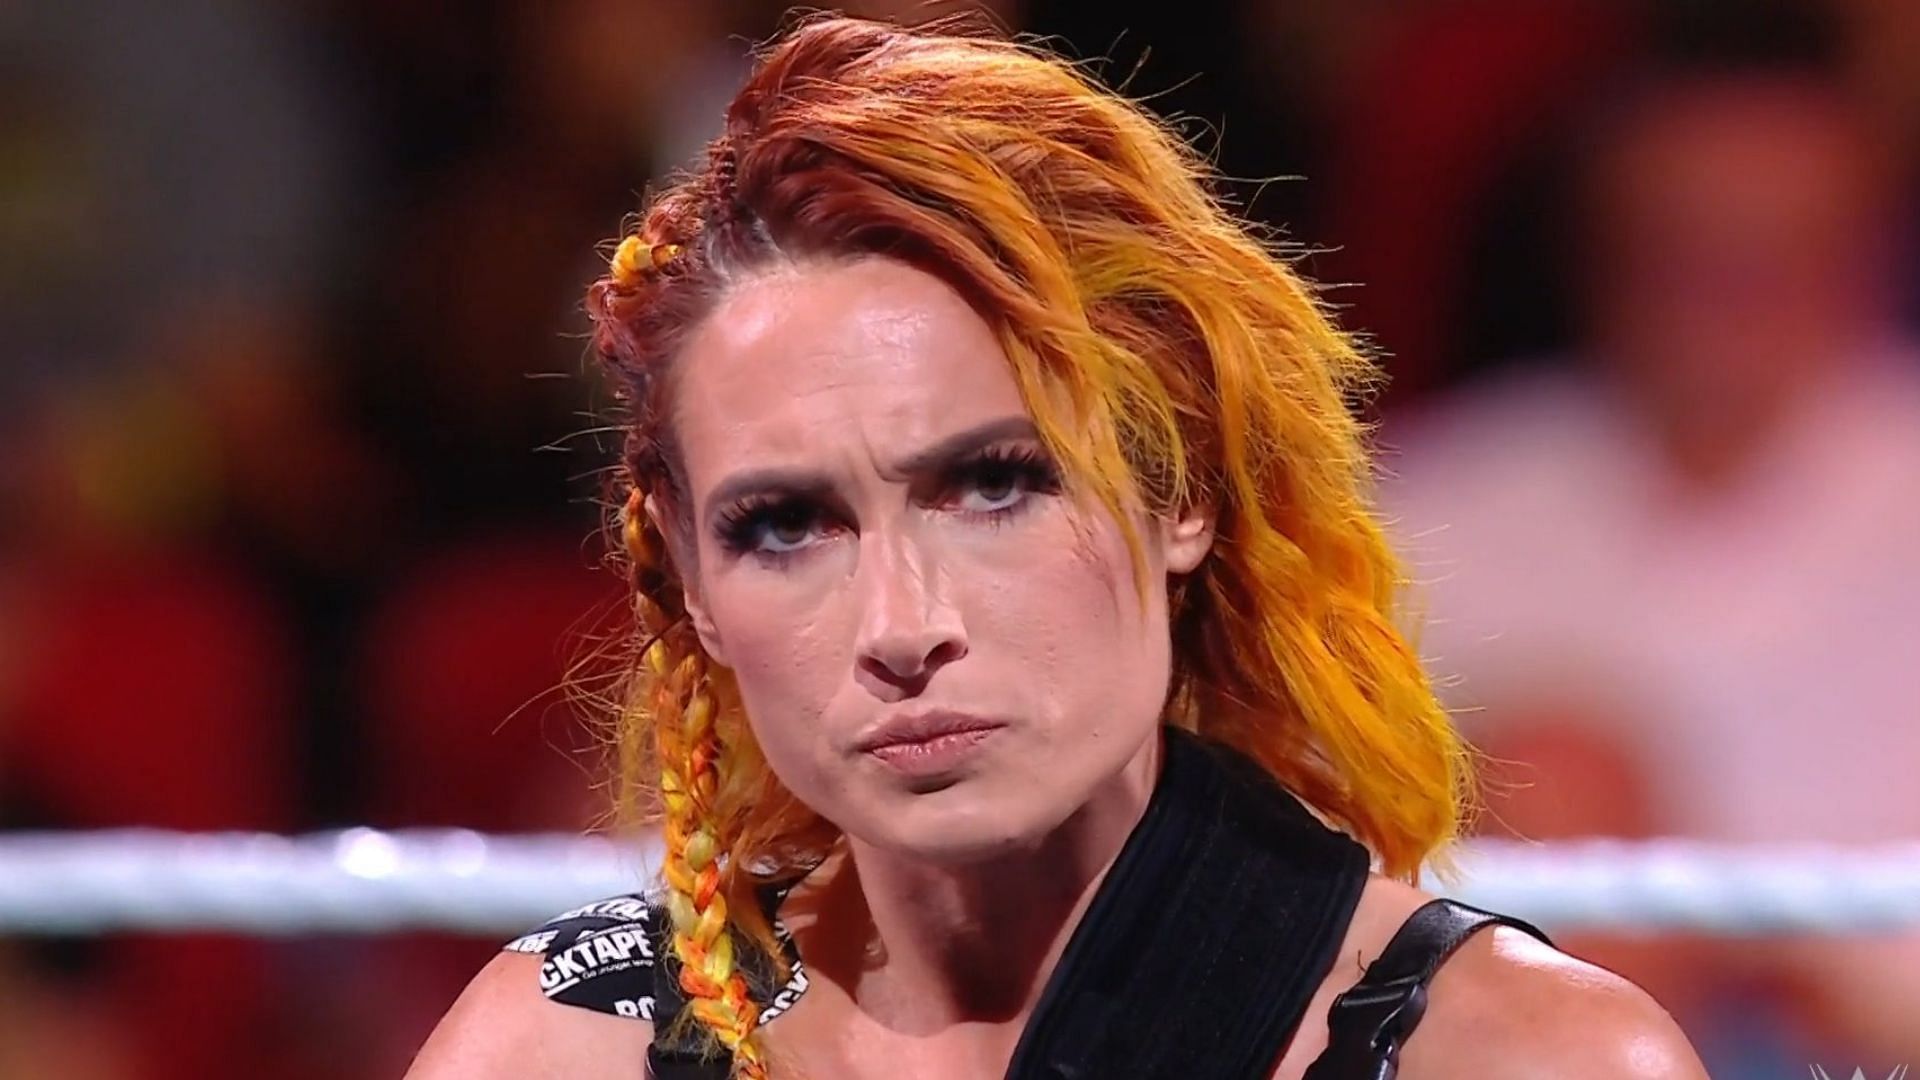 WWE announced Becky Lynch will be out for several months during RAW